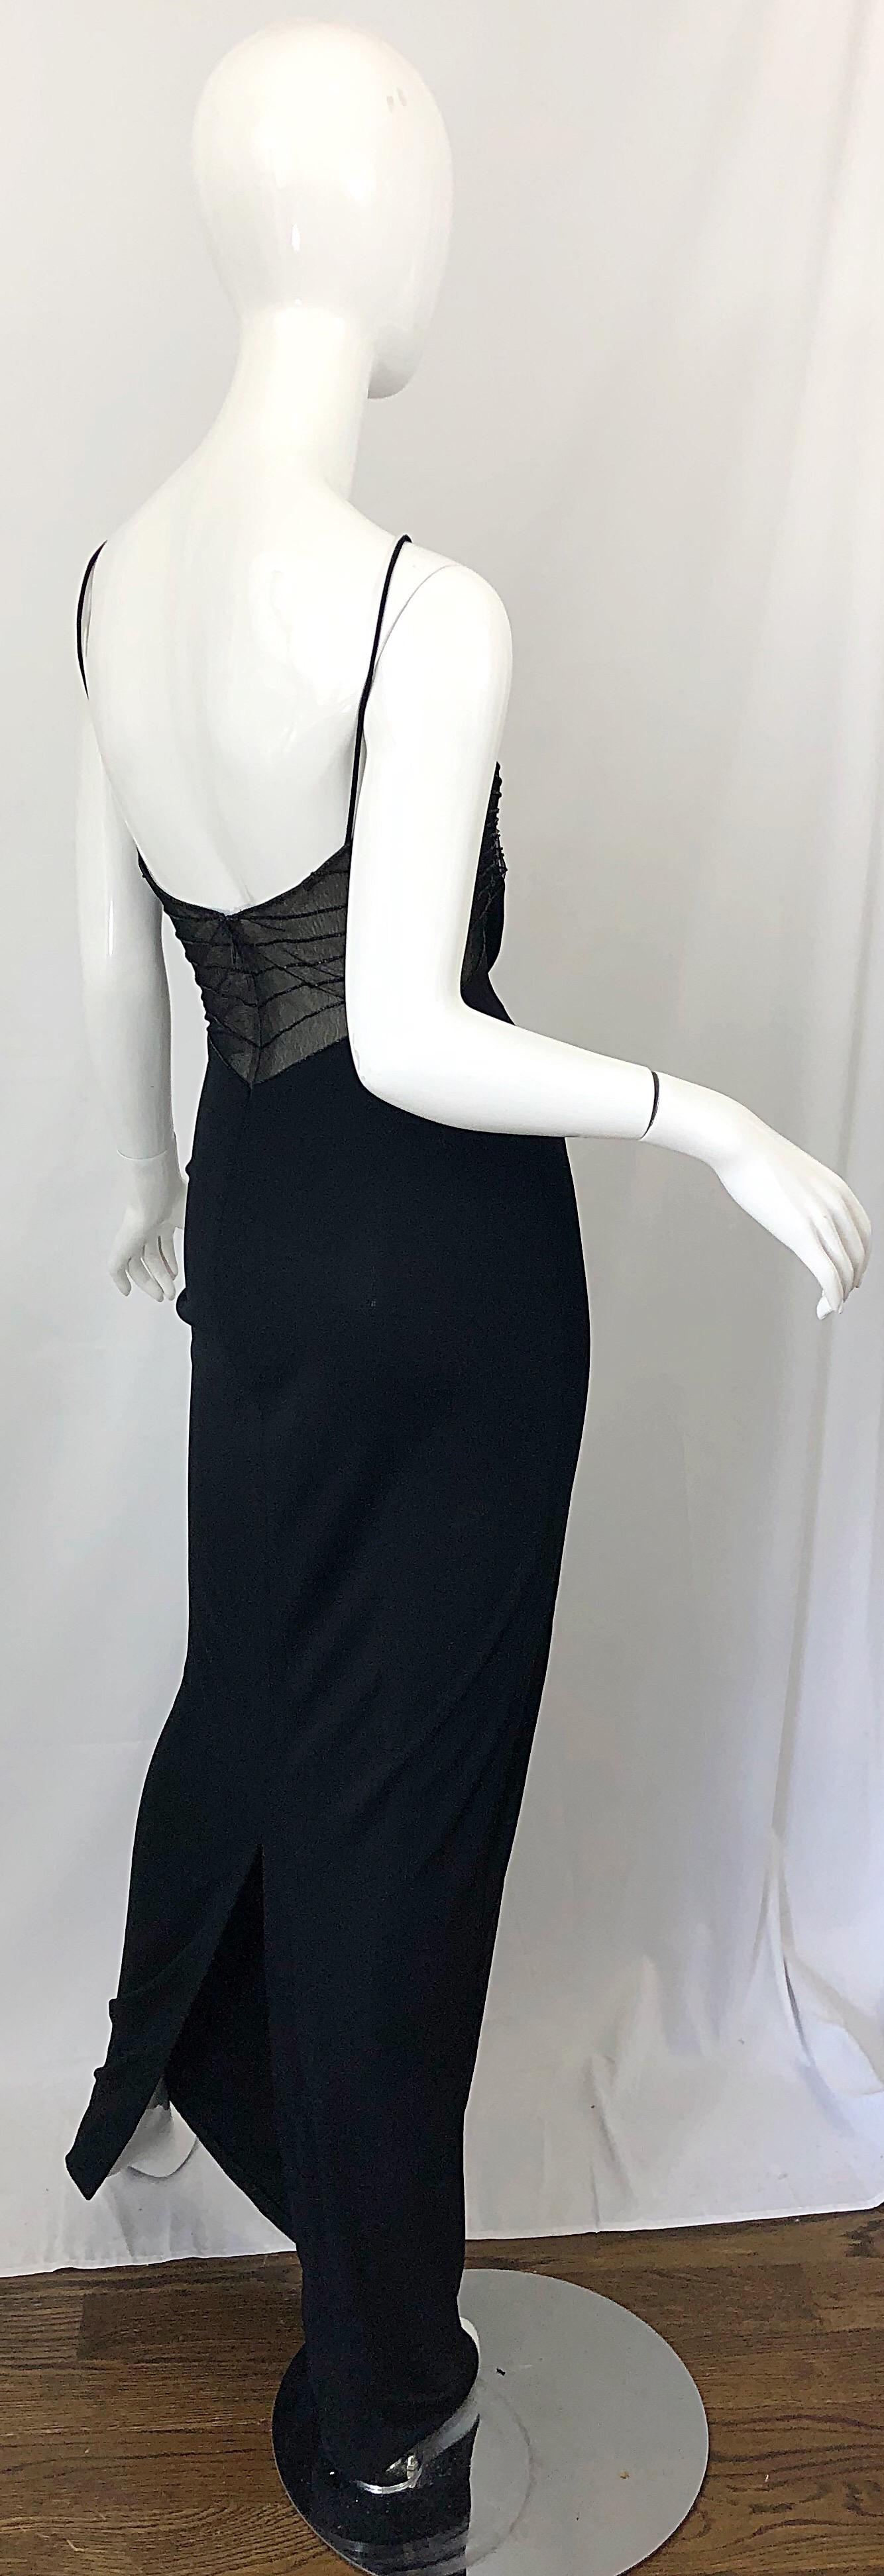 NWT 1990s Randolph Duke Couture Size 12 Black 90s Plunging Semi Sheer Gown Dress 10